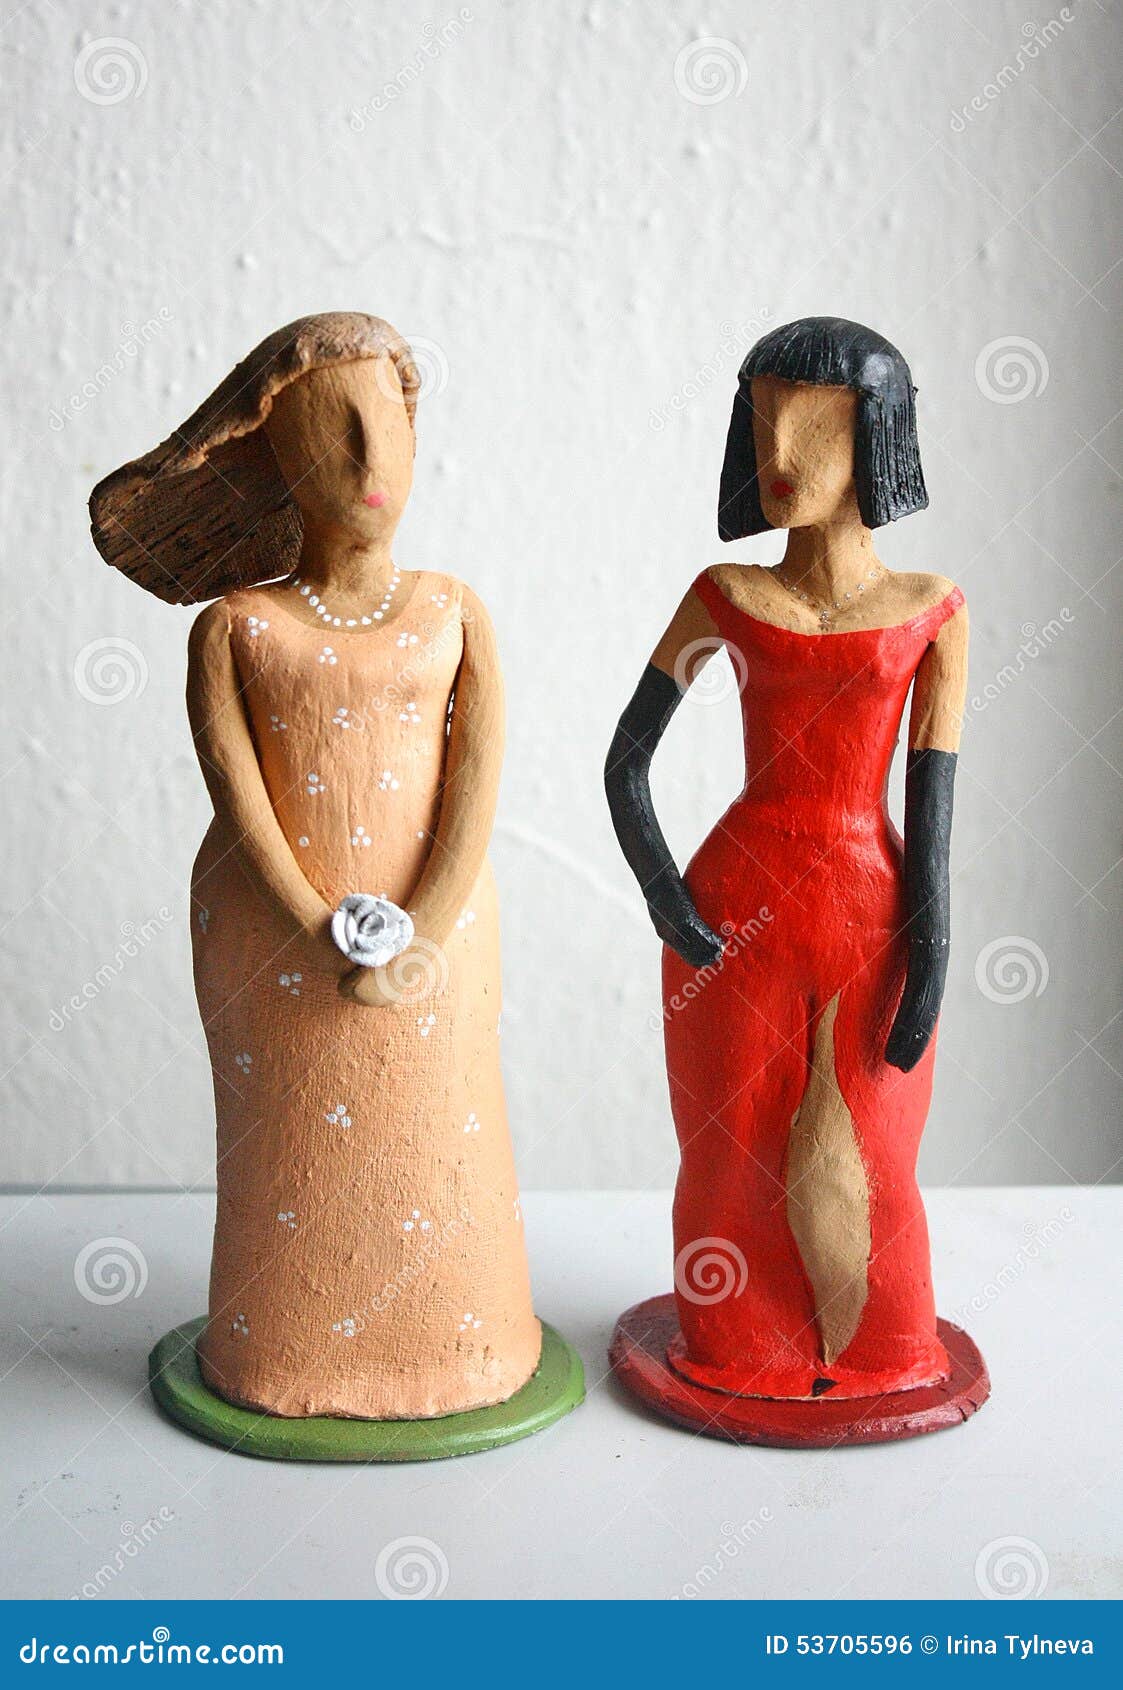 sculpture femininity and sexuality